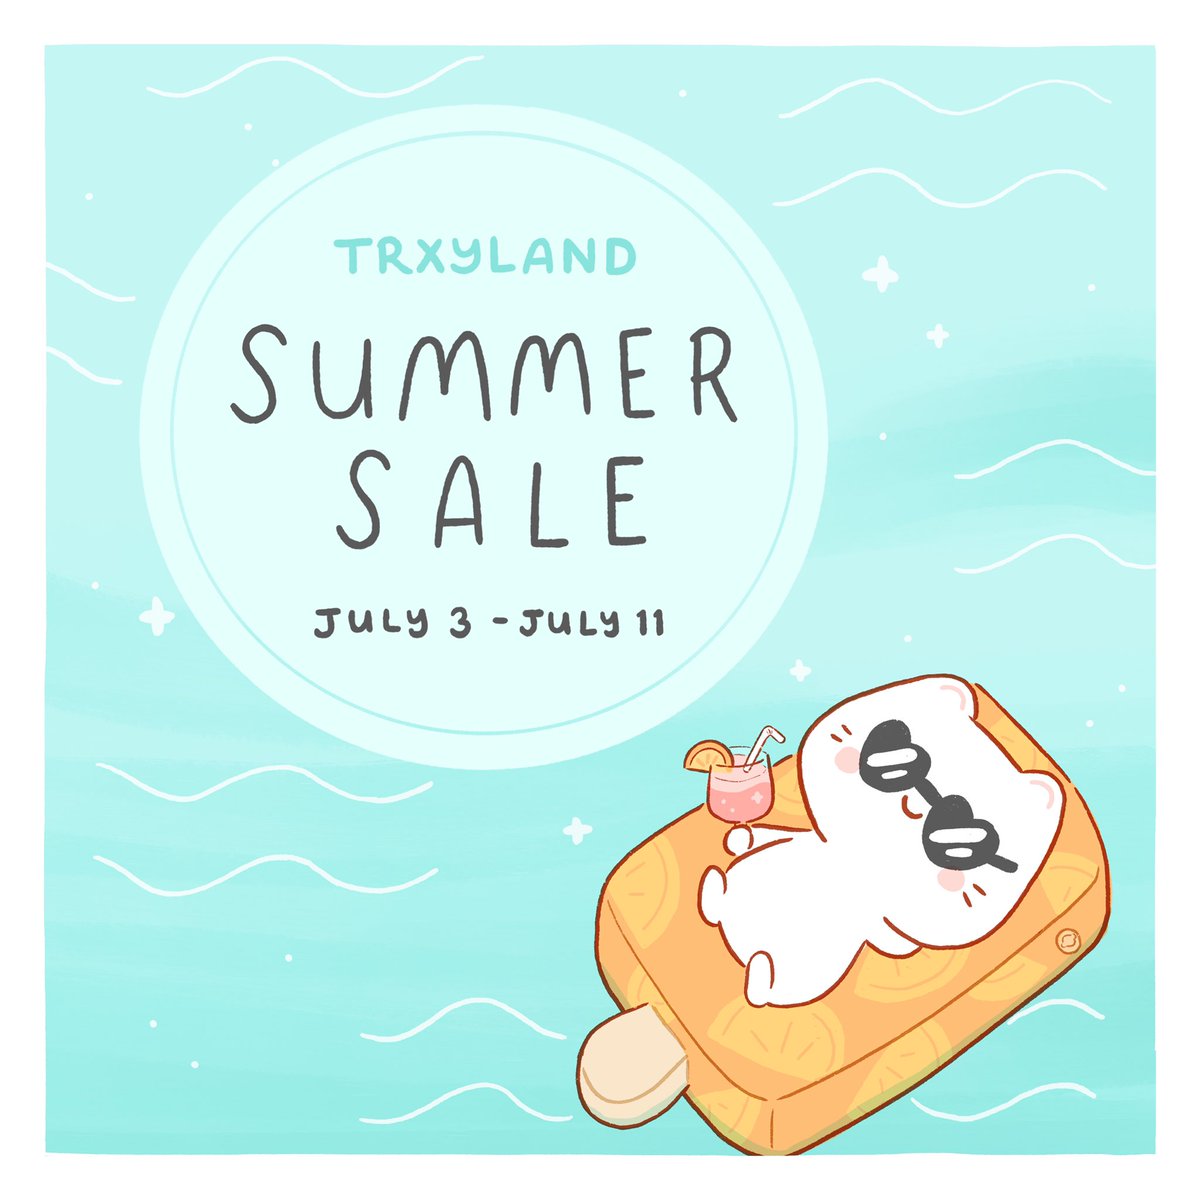 I'm also running a Summer Sale for the next one week (ends July 11)! Up to 20% off selected items https://t.co/7mXTr7CjCn 